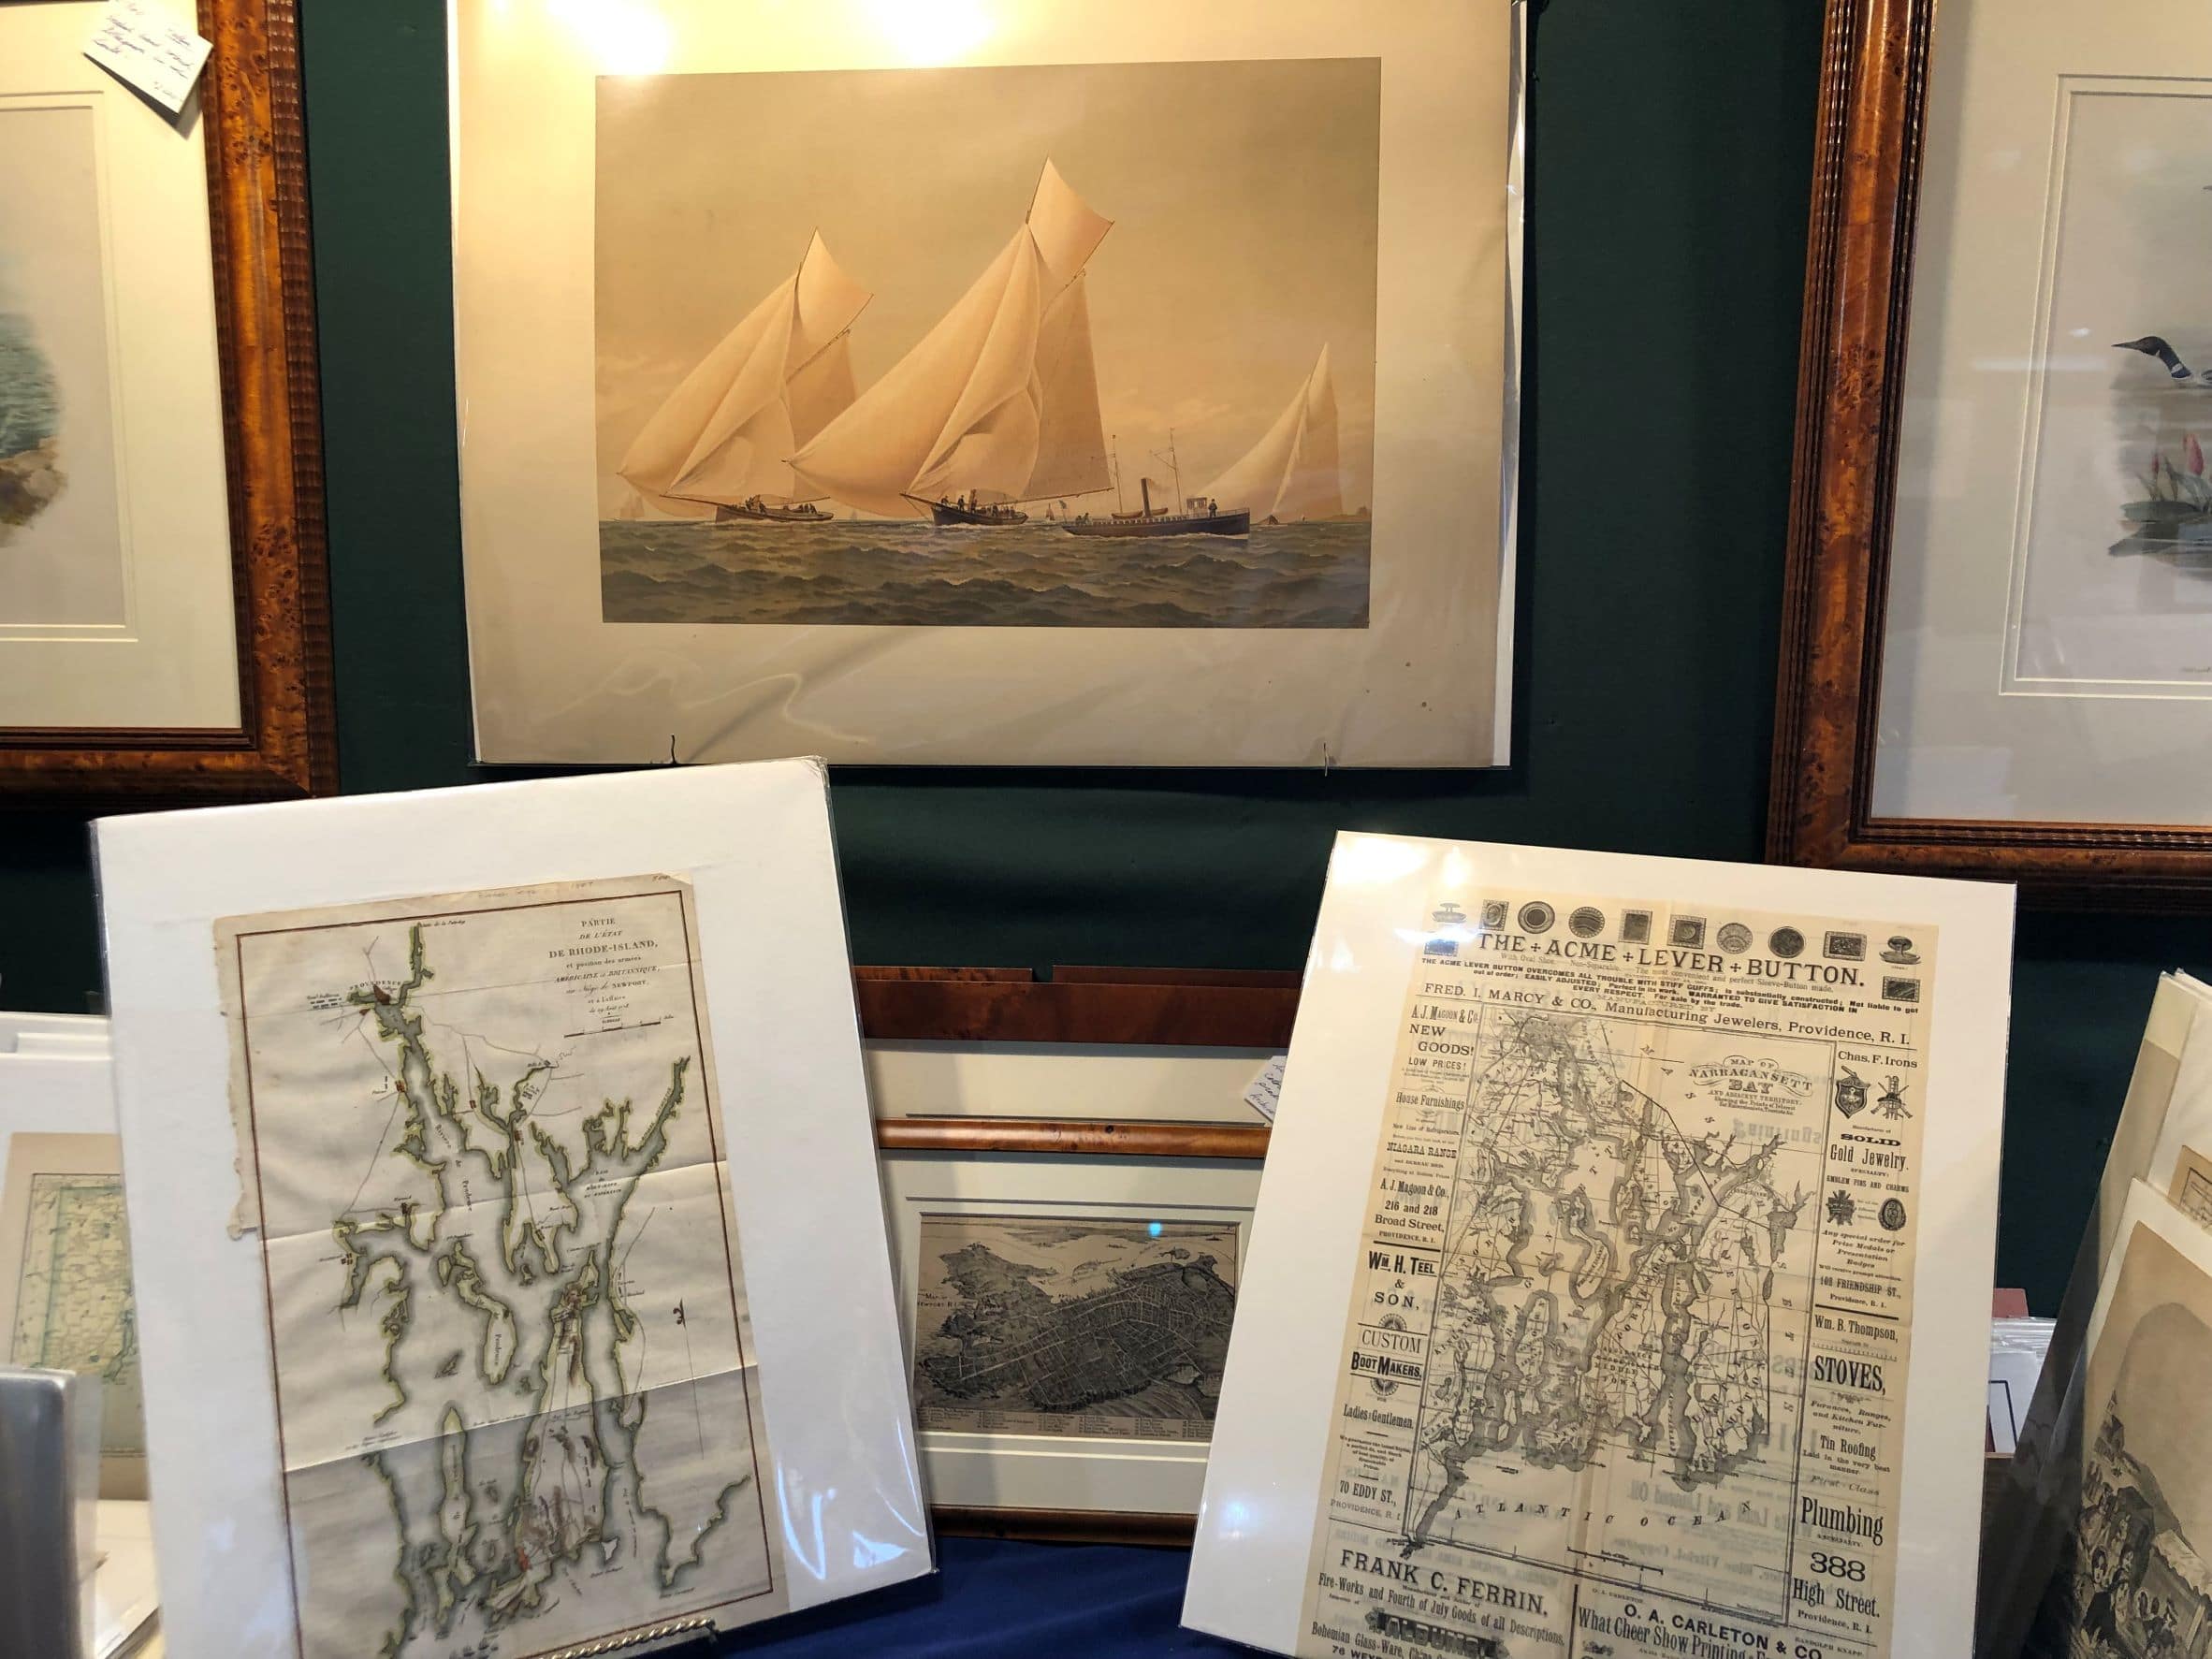 Visit our Antique Prints Gallery on Bowens Wharf in historic newport RI, we feature a small collection of rare views & old maps of Newport engravings & lithographs over 100 years old!